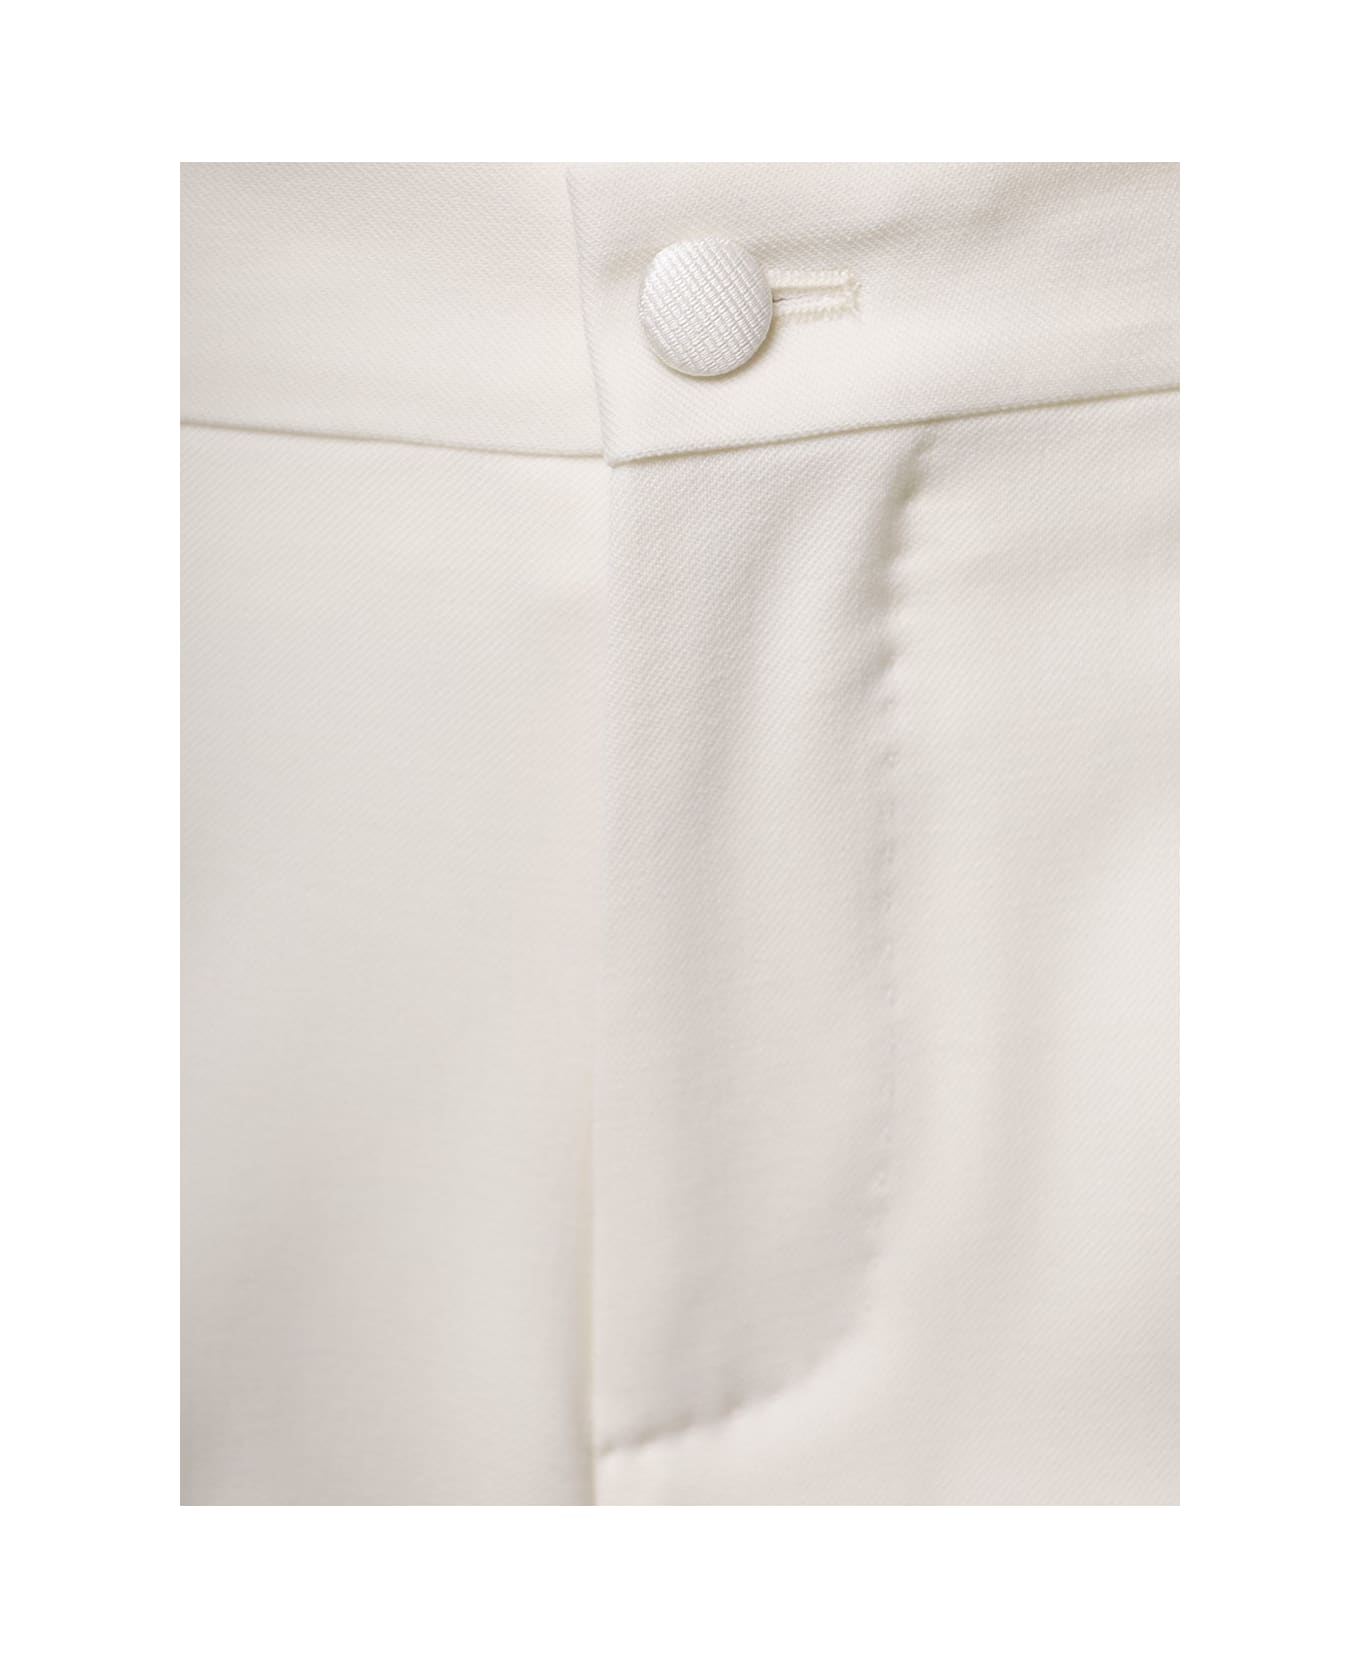 Dolce & Gabbana White Slim Pants With Covered Button In Wool And Silk Blend Man - White